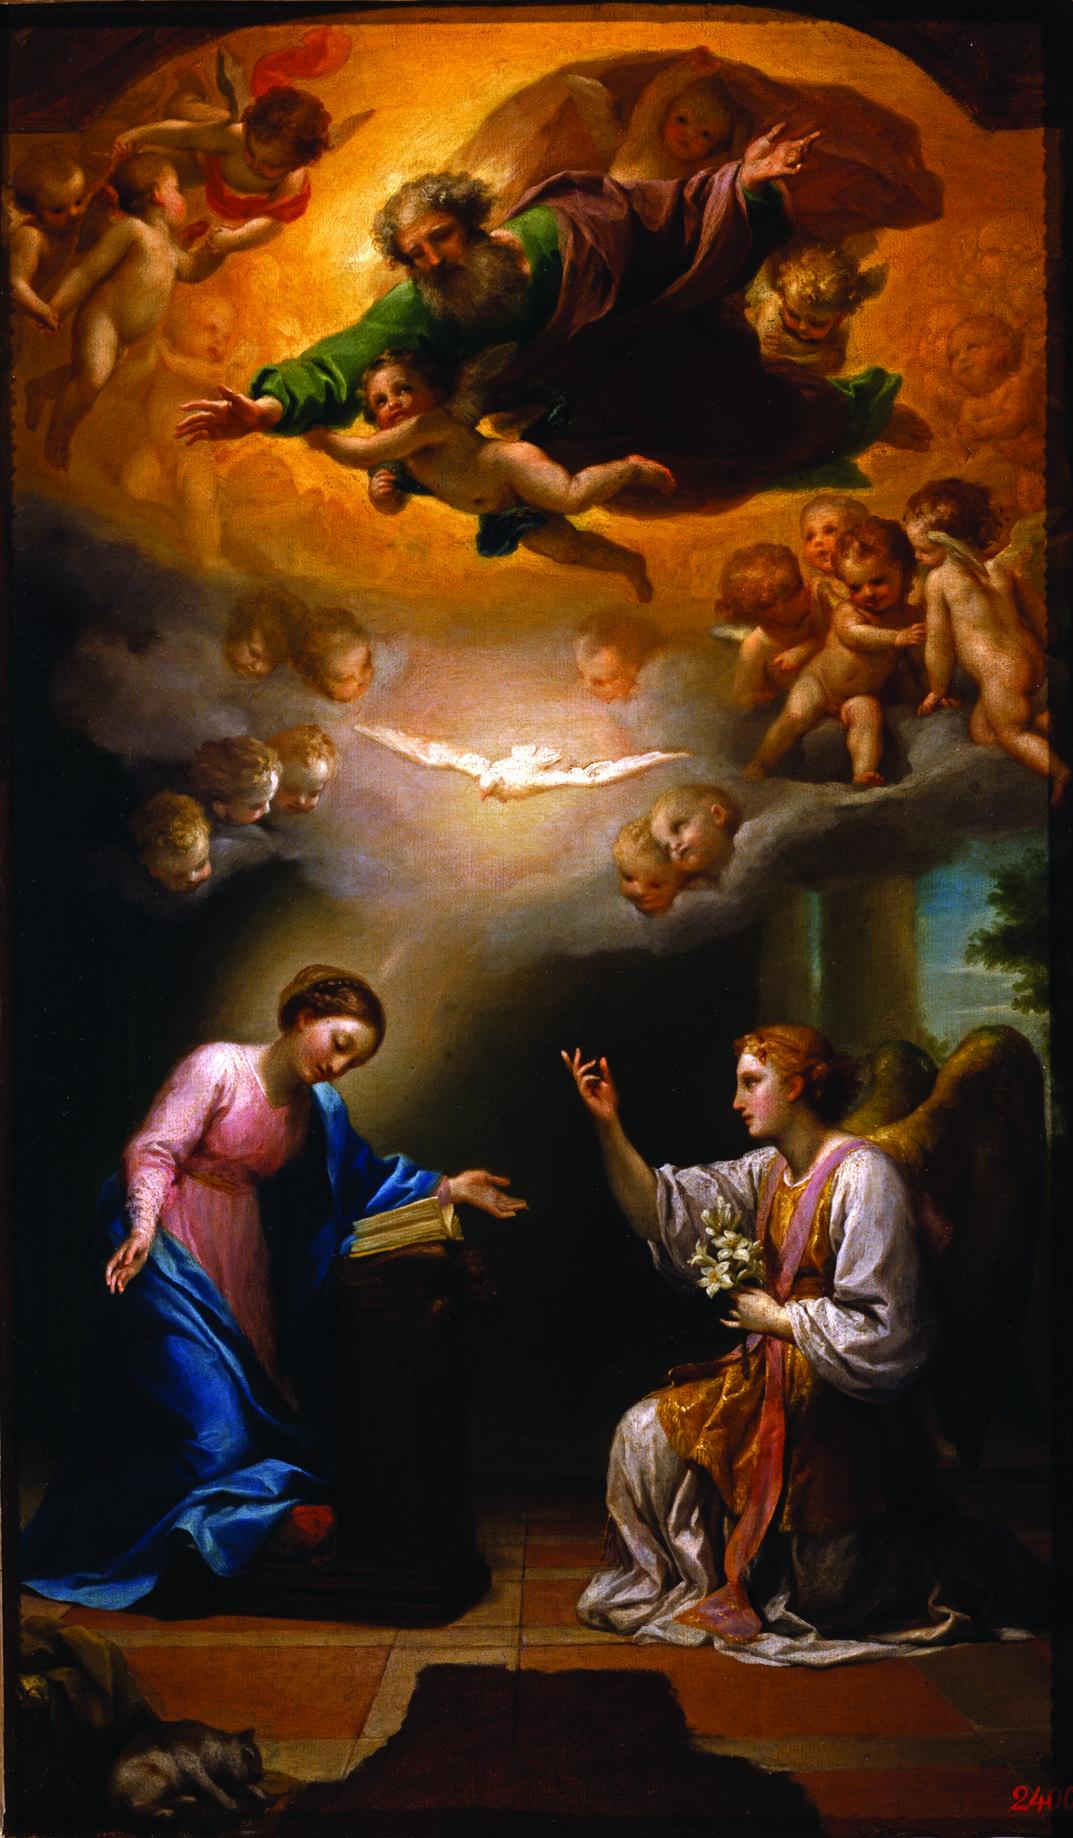 Painting of two figures in robes, with celestial scene featuring dove, cherubs, and a God-like figure above. 